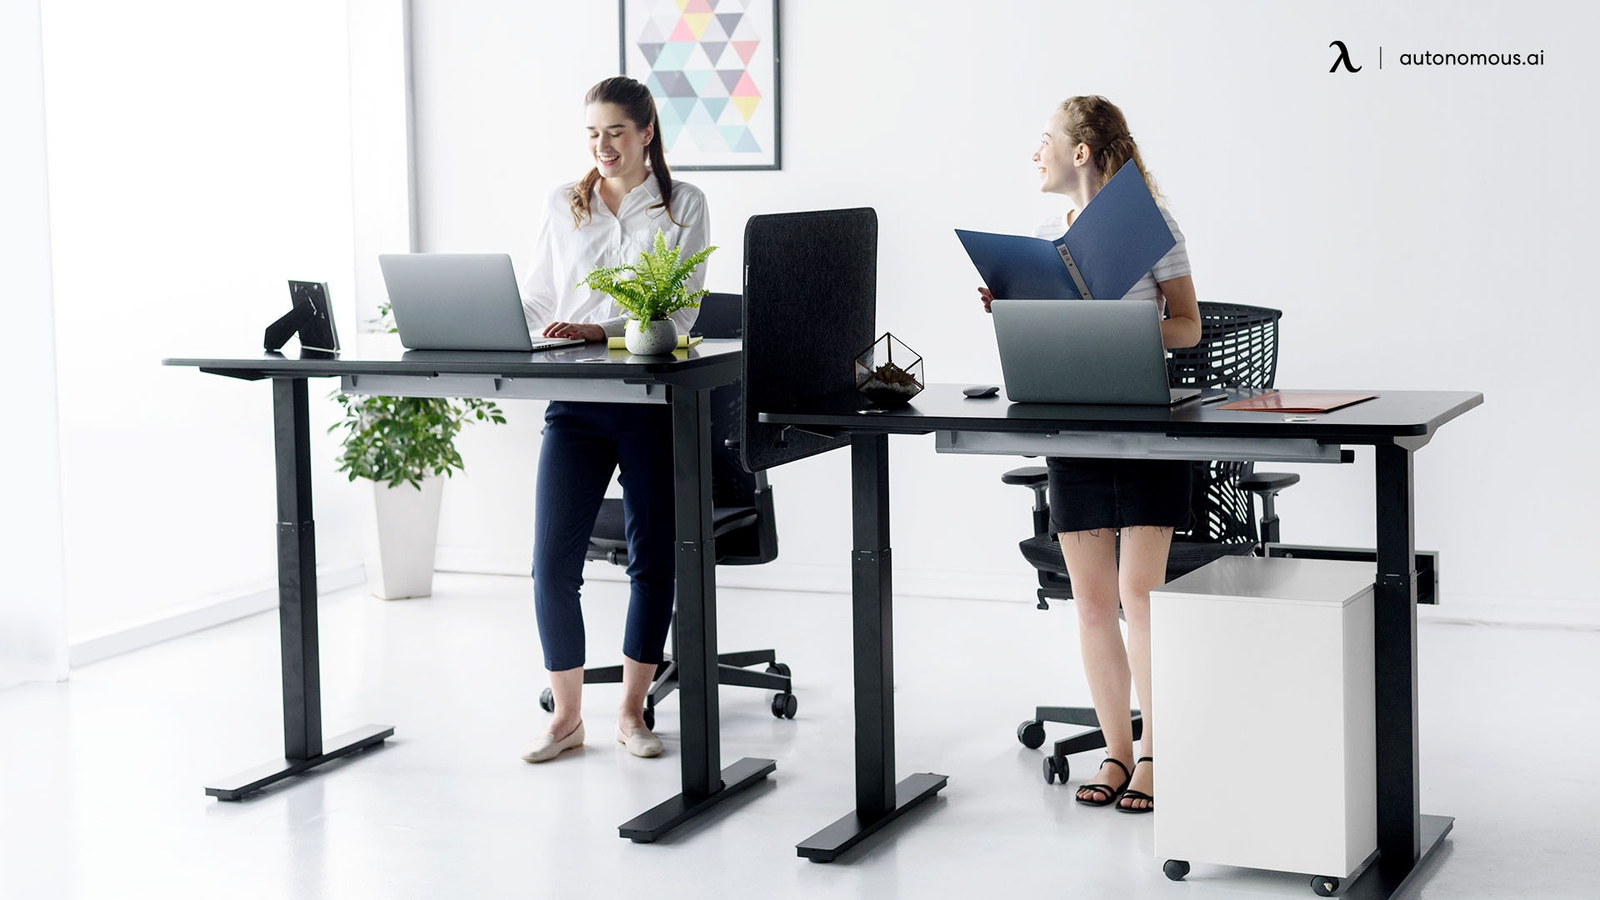 5 Most Stable Motorized Standing Desk Legs for DIY-Lovers